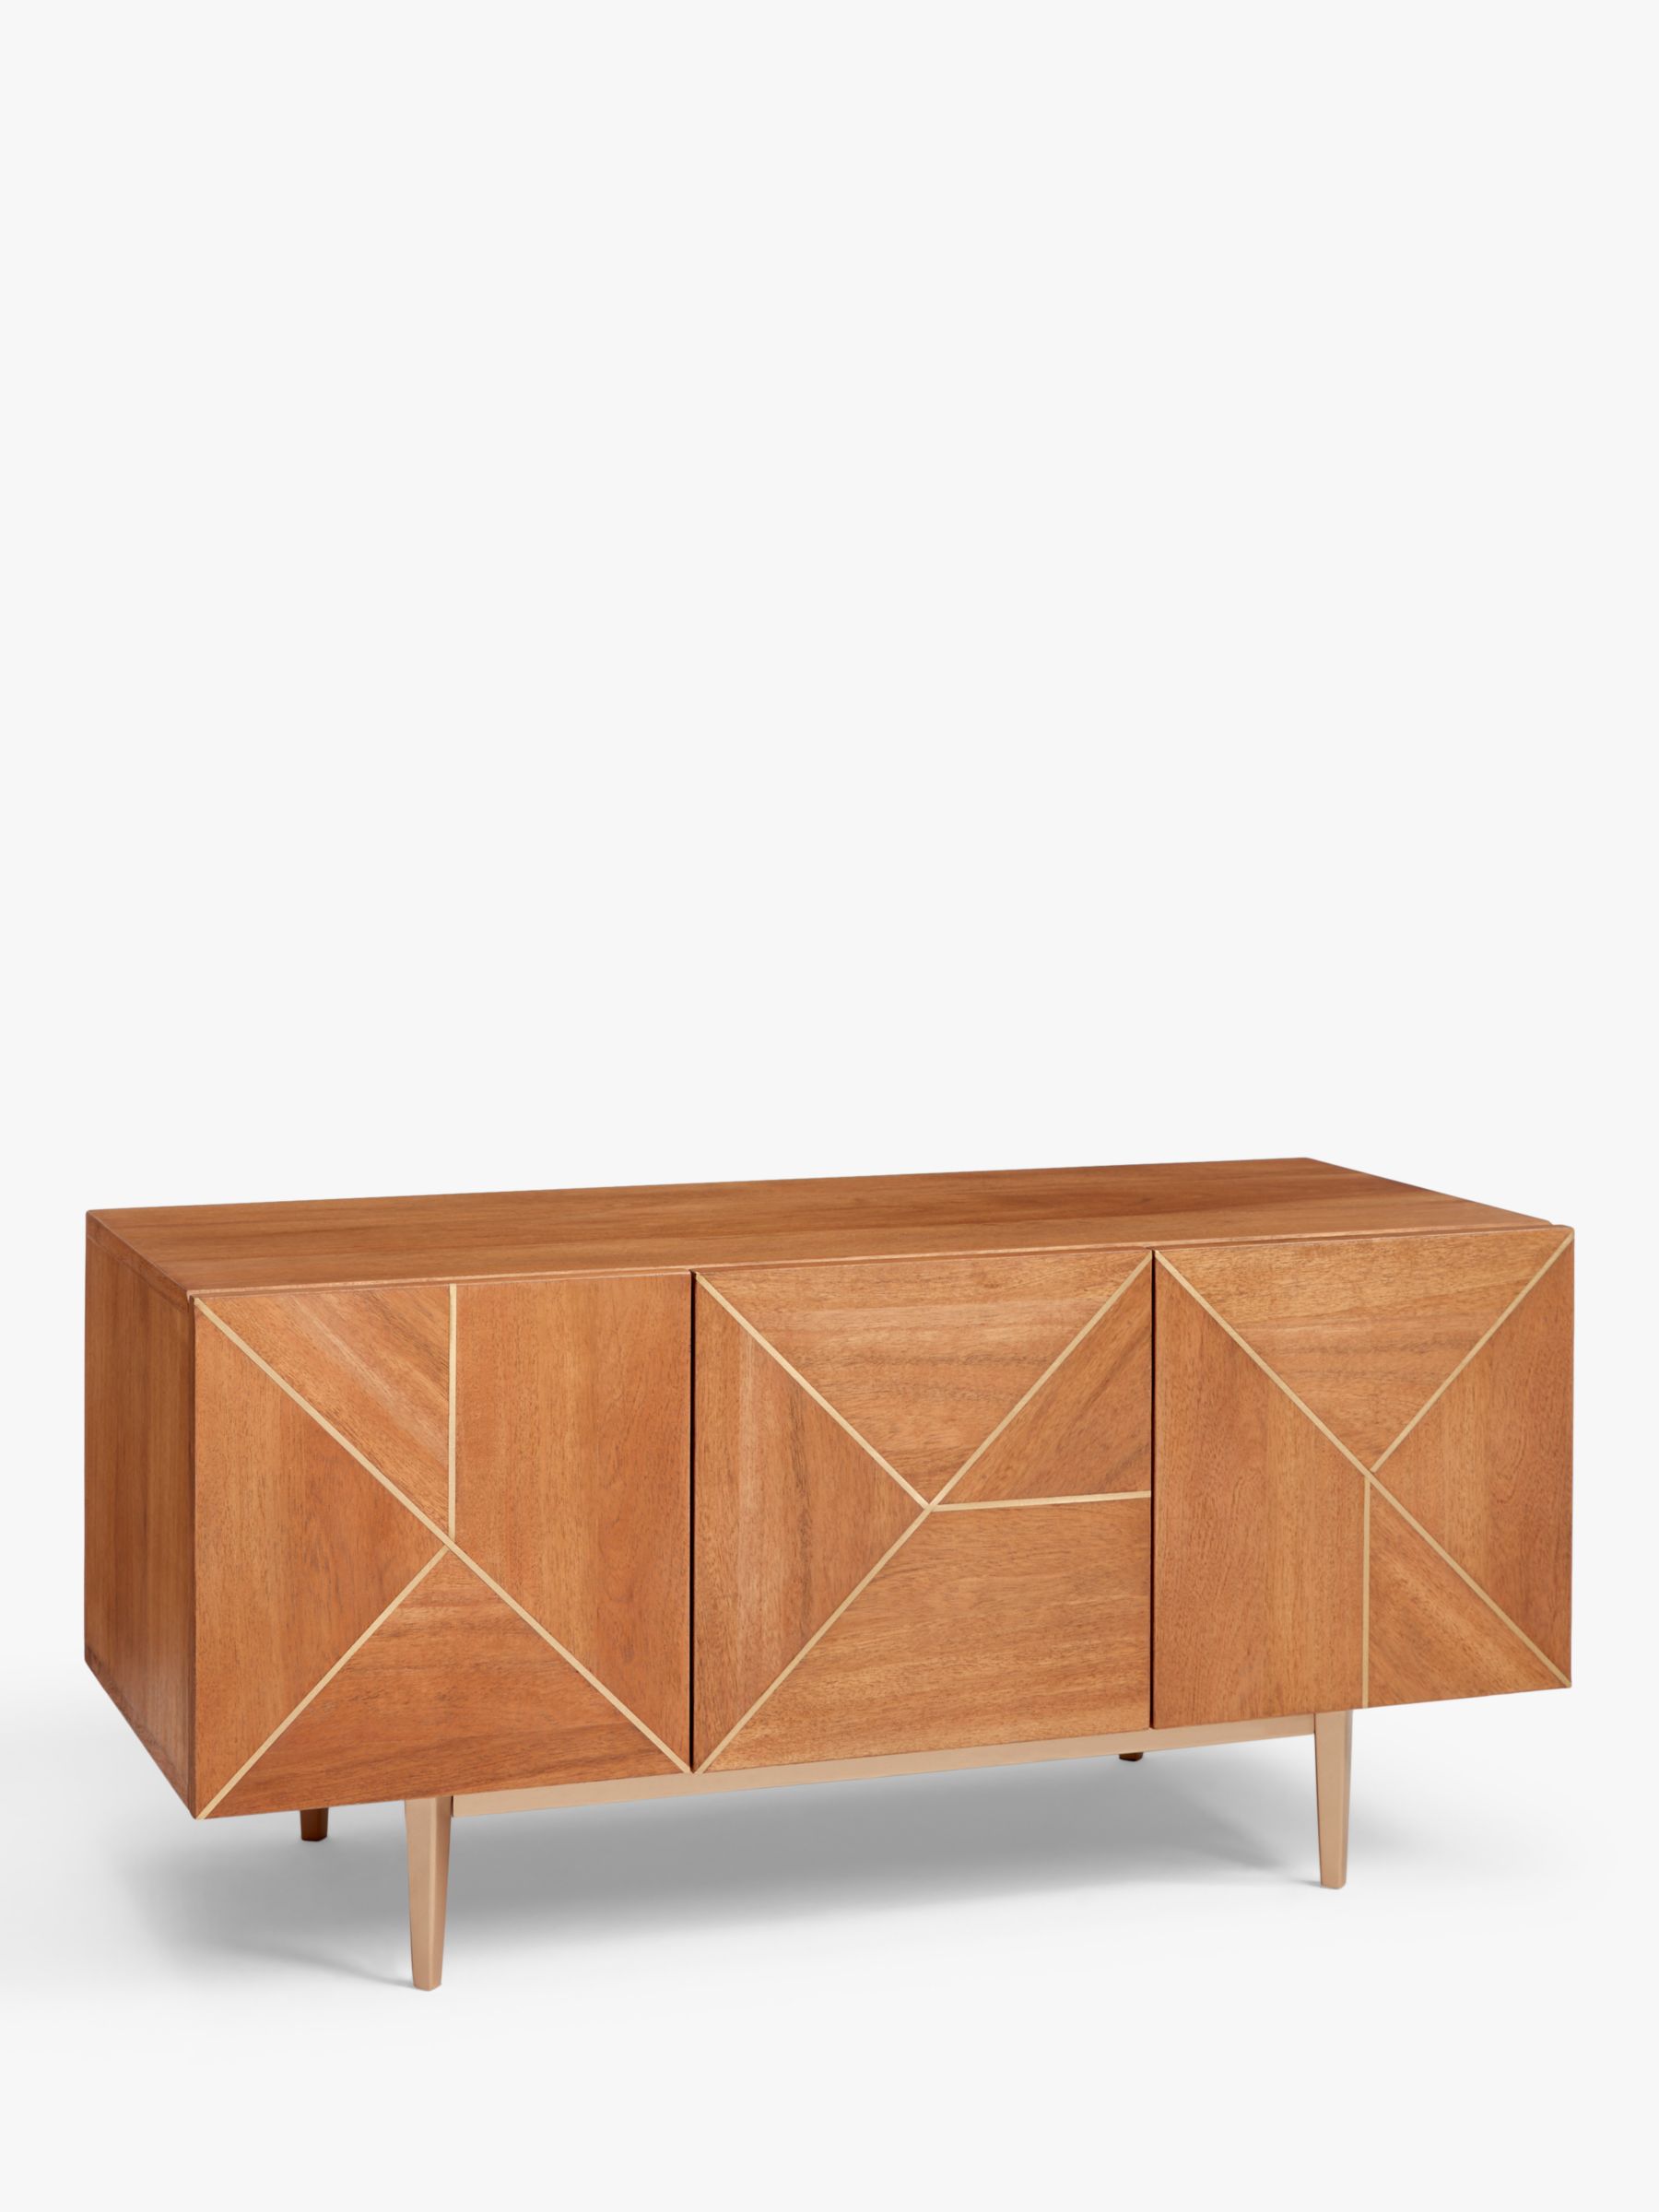 Photo of John lewis + swoon mendel tv stand sideboard for tvs up to 50 light brown